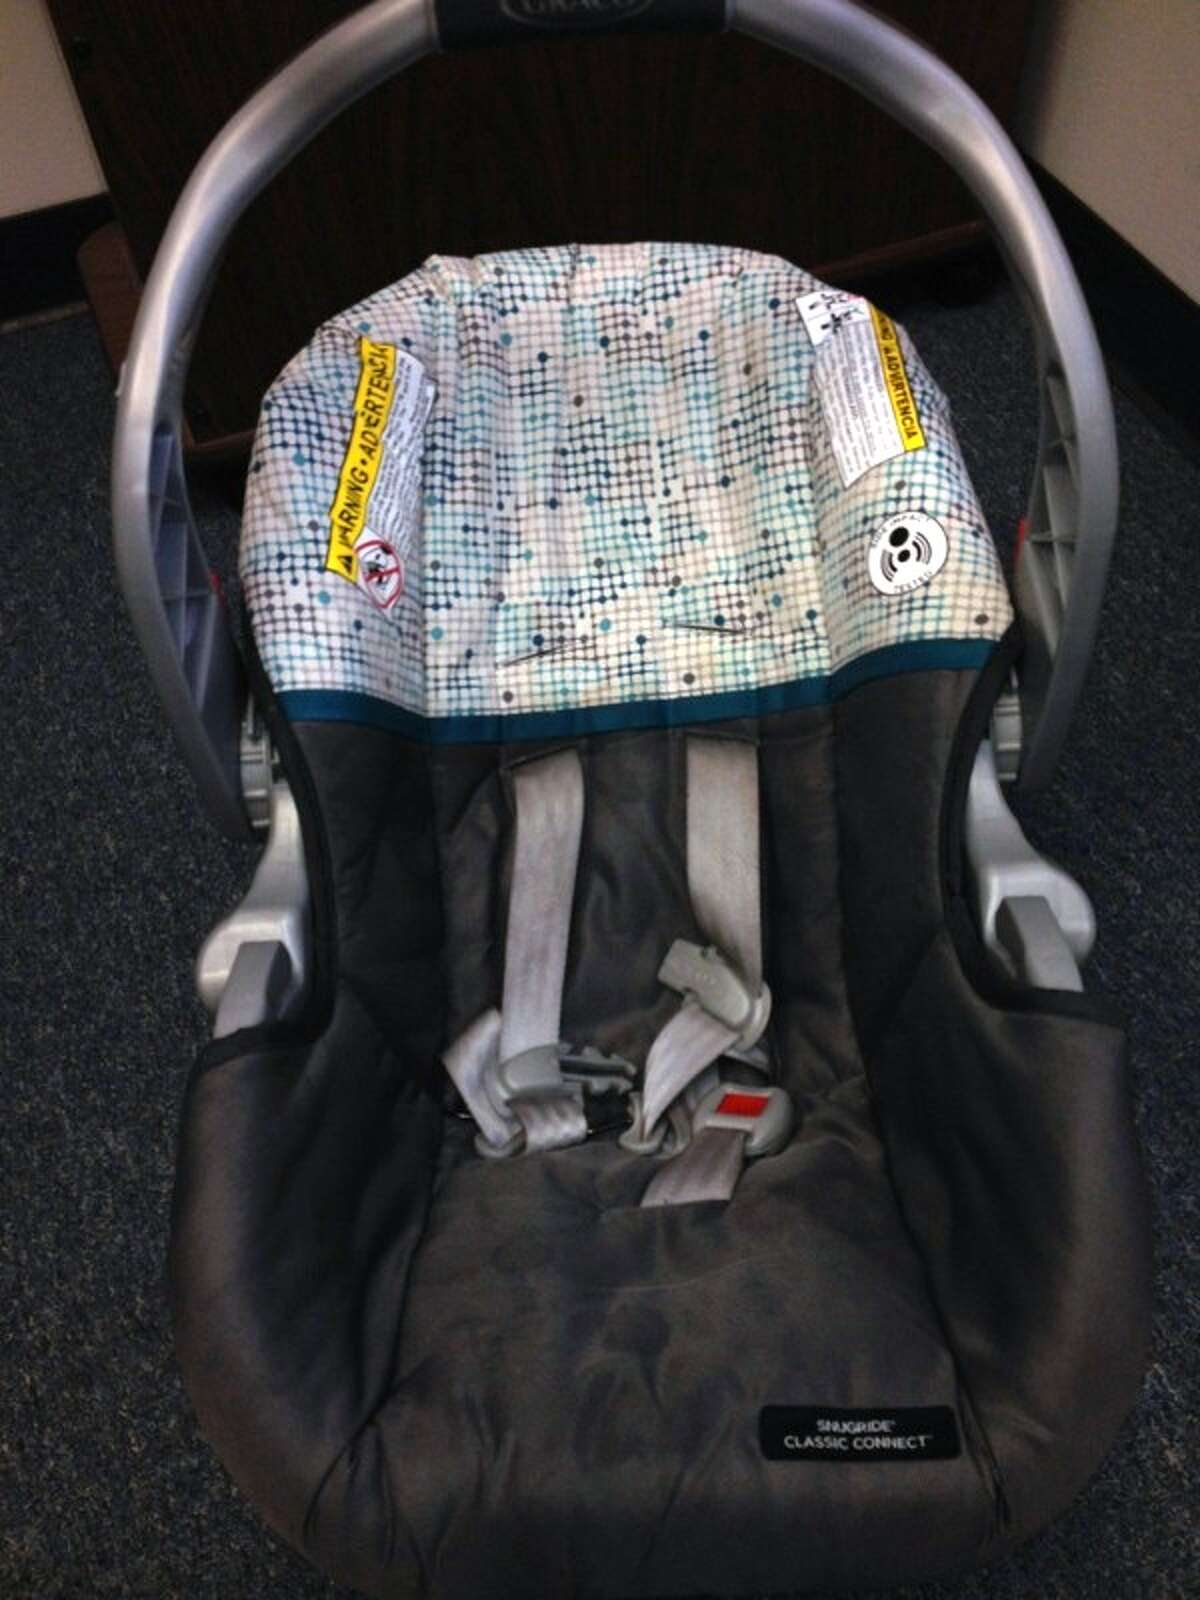 The child's car seat. The baby carrier is a gray Graco SnugRide Classic Connect.